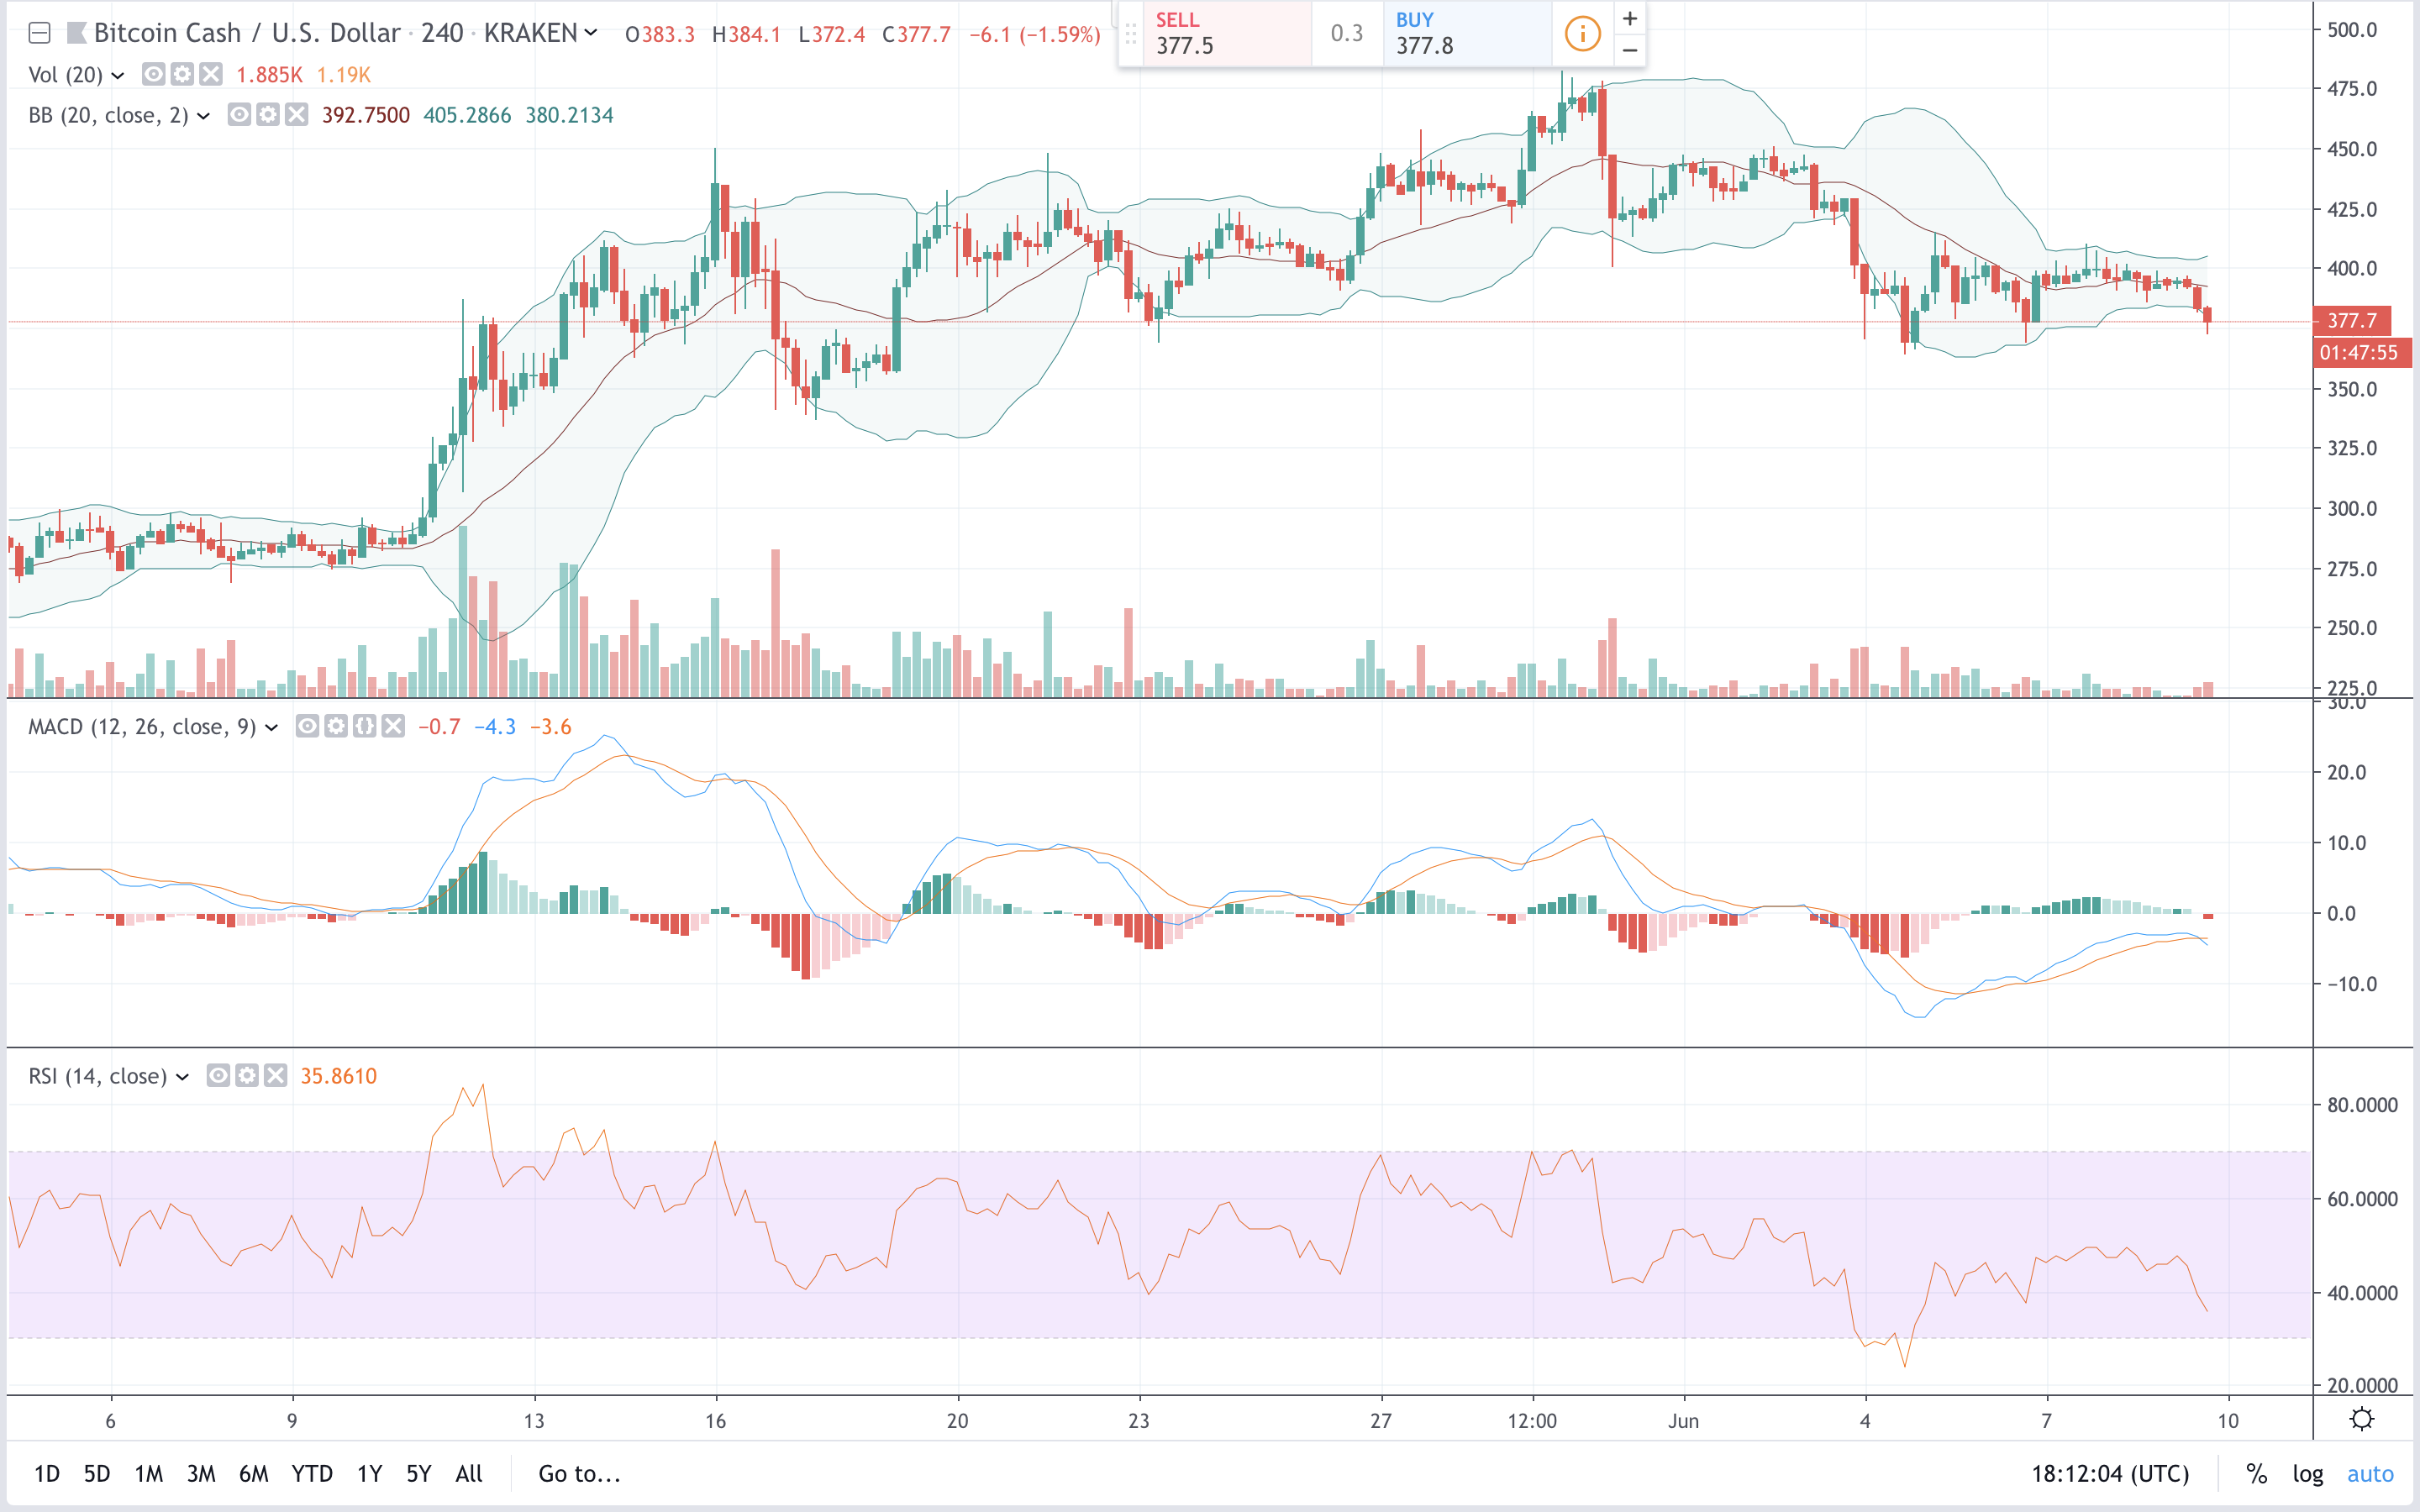 Markets Update: Crypto Prices Sink Finding New Support Levels 